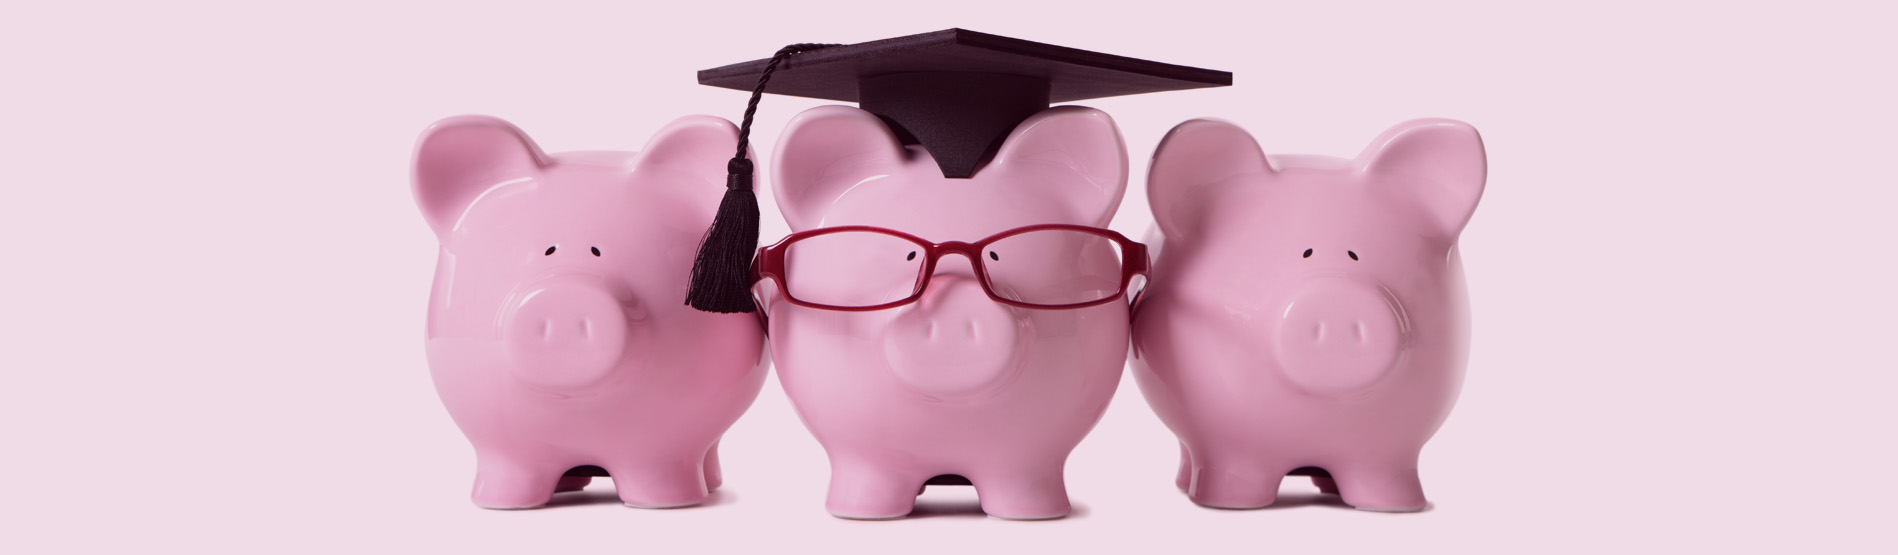 Row of pink piggy banks, one wearing glasses and academic cap